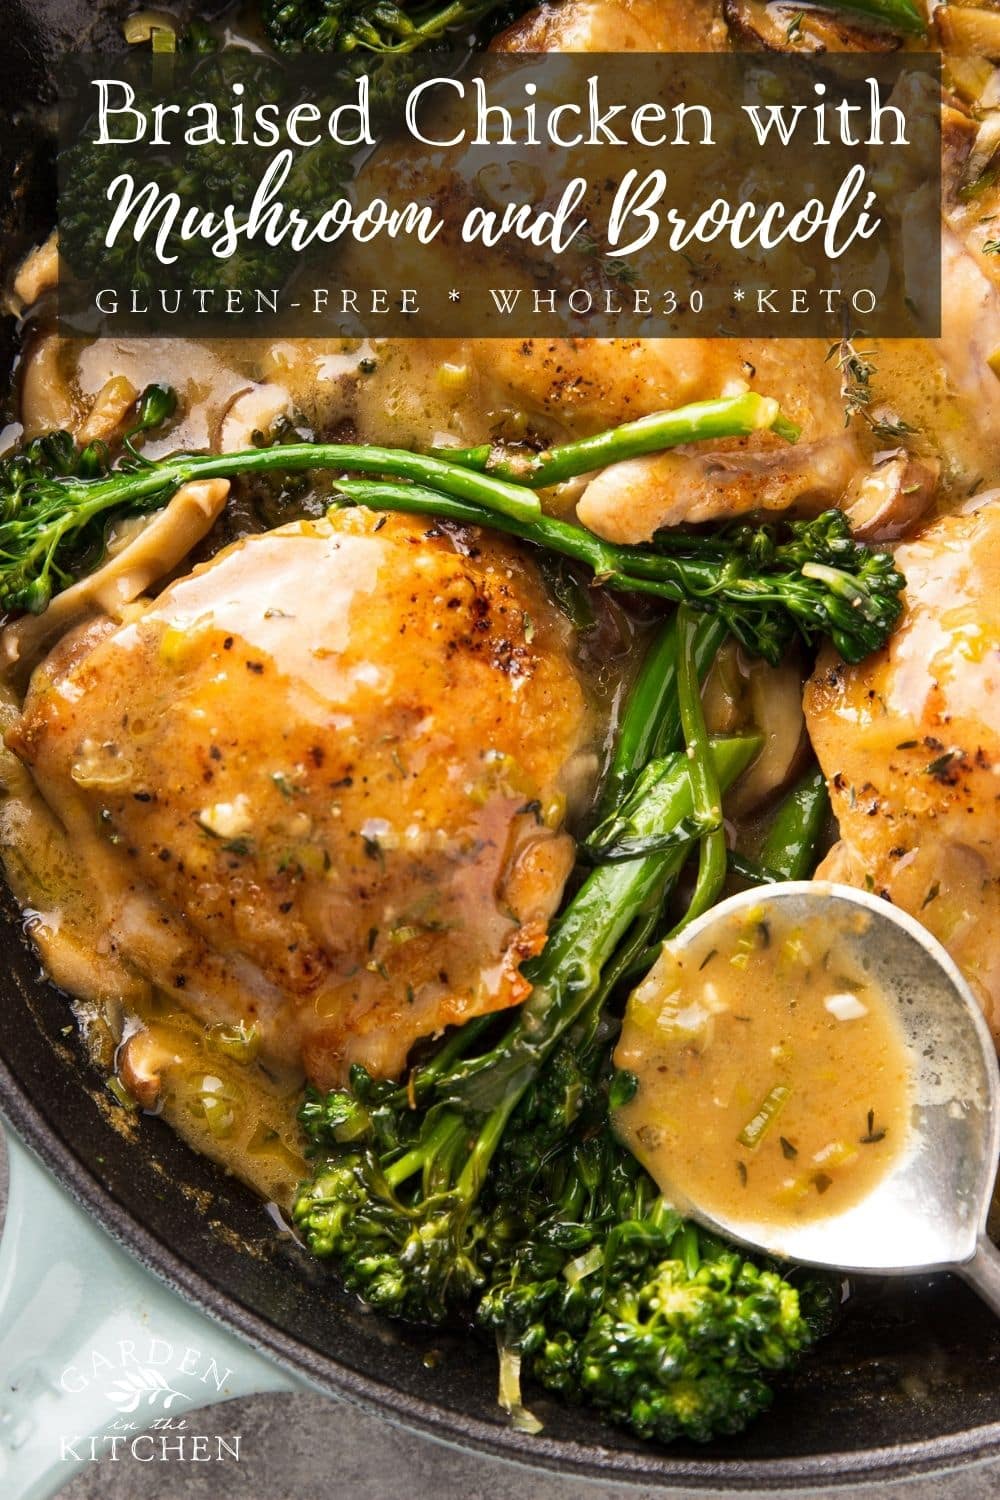 Braised Chicken with Mushrooms and Broccoli | Garden in the Kitchen